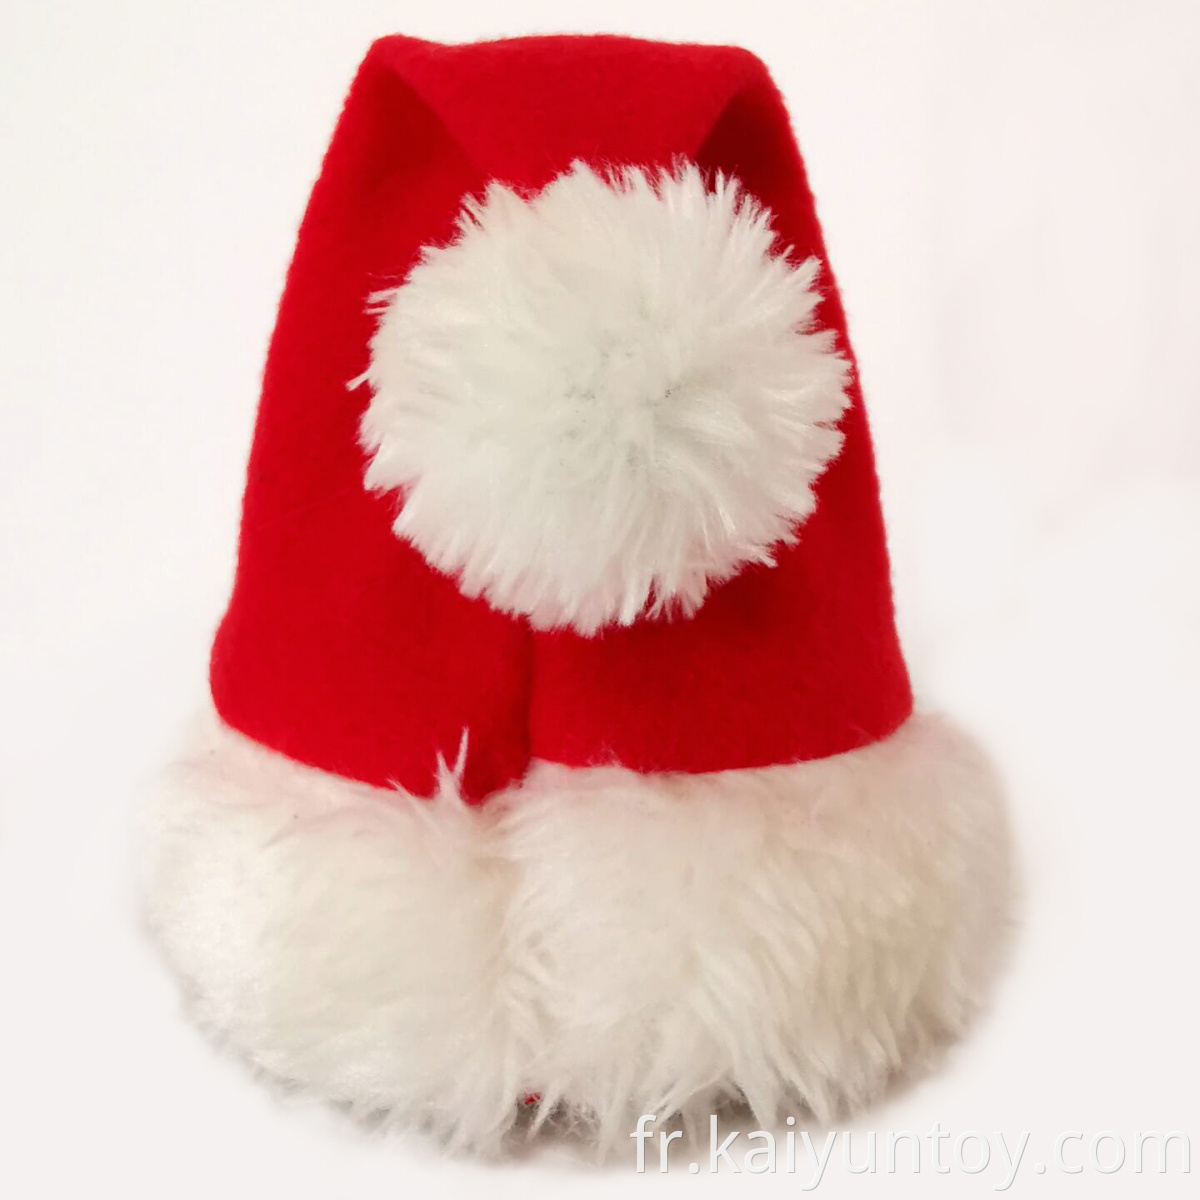 SANTA HAT BATTERY OPERATED CHRISTMAS TOY